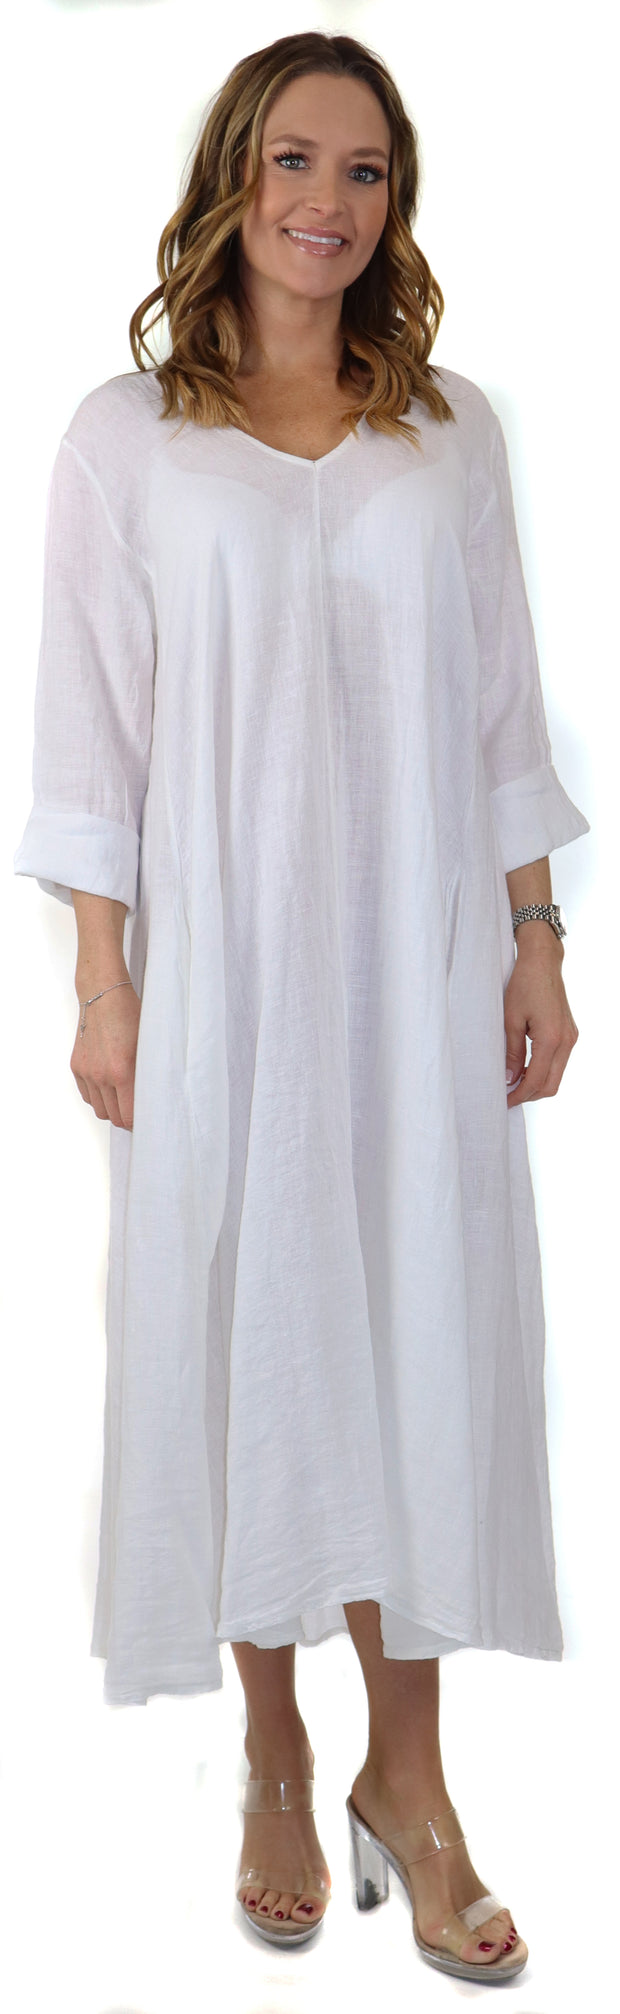 Womens Swing Maxi Dress, Loose Fitting, Made in Italy | Regular and Plus Sizes, 100% Linen